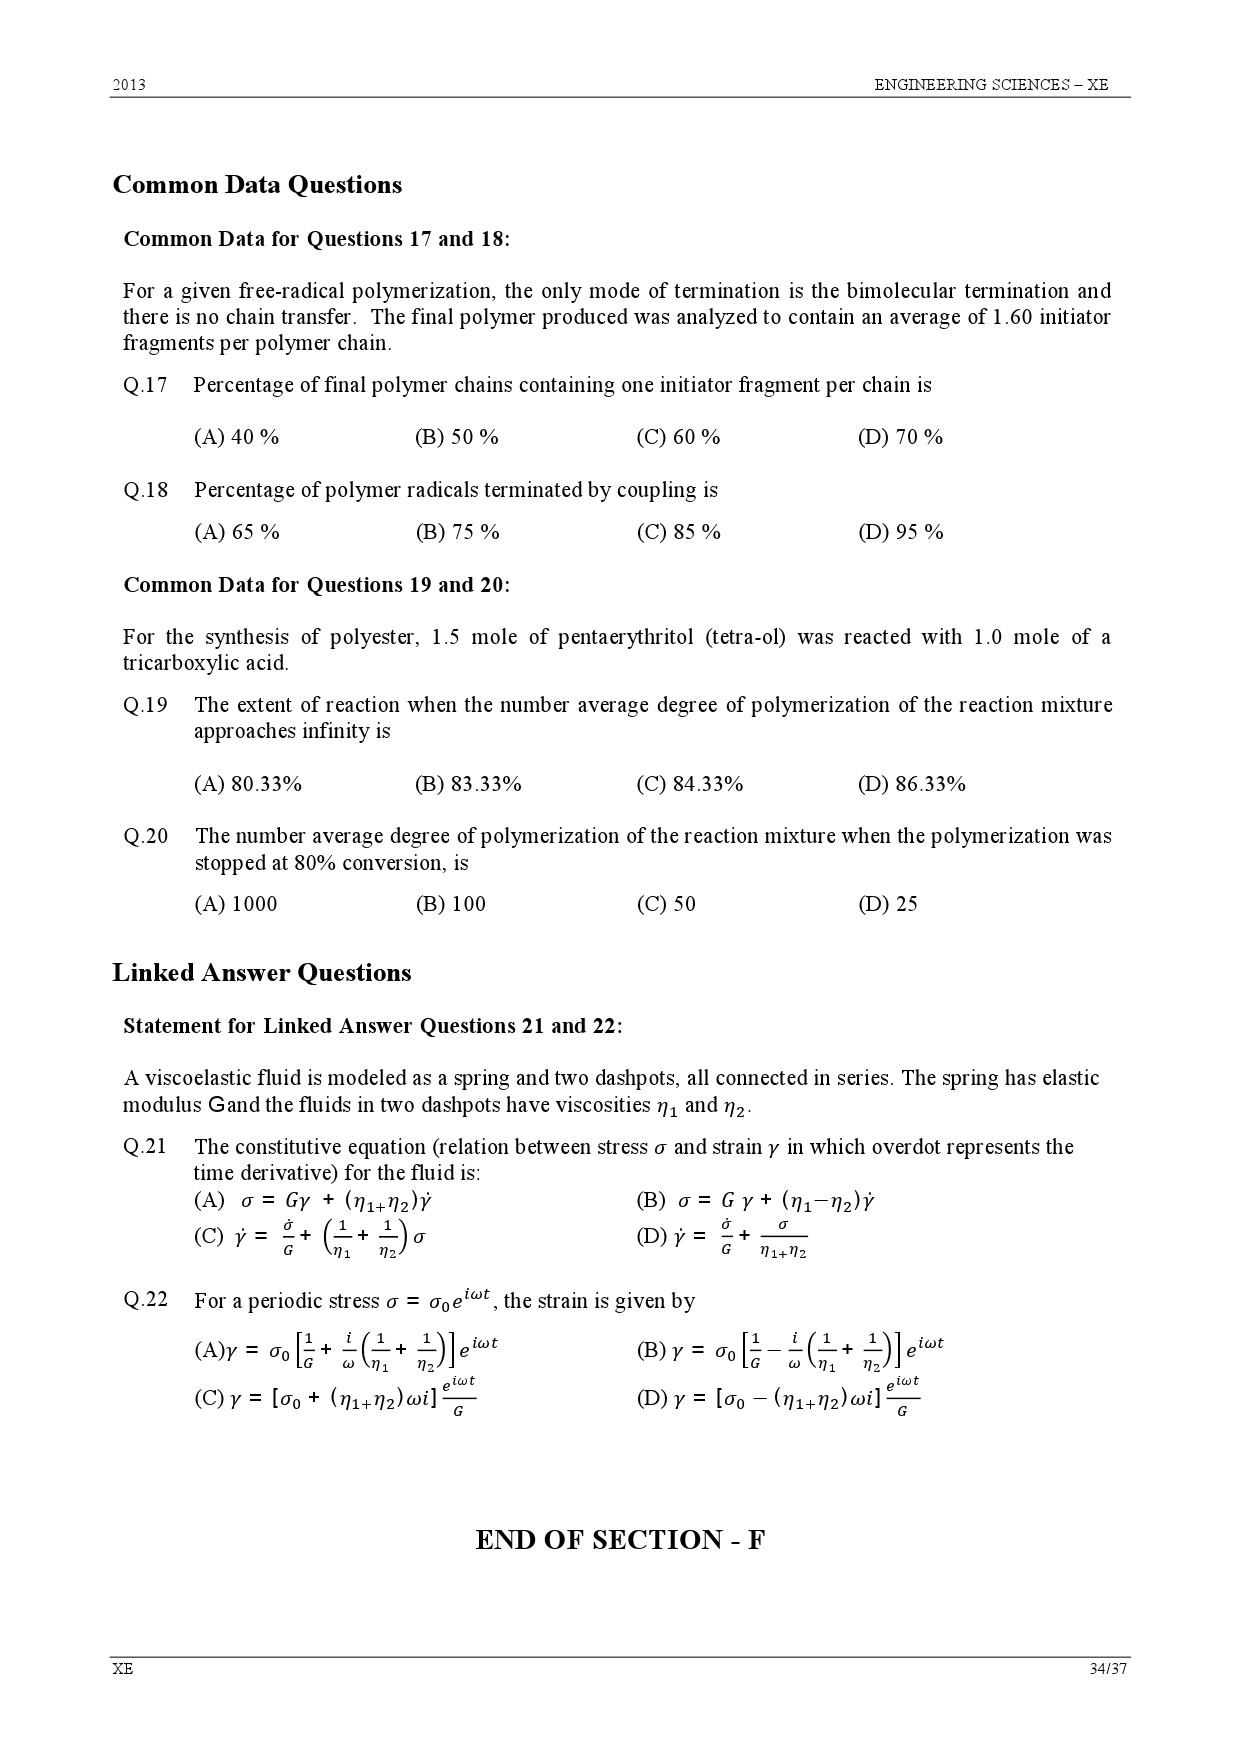 GATE Exam Question Paper 2013 Engineering Sciences 34